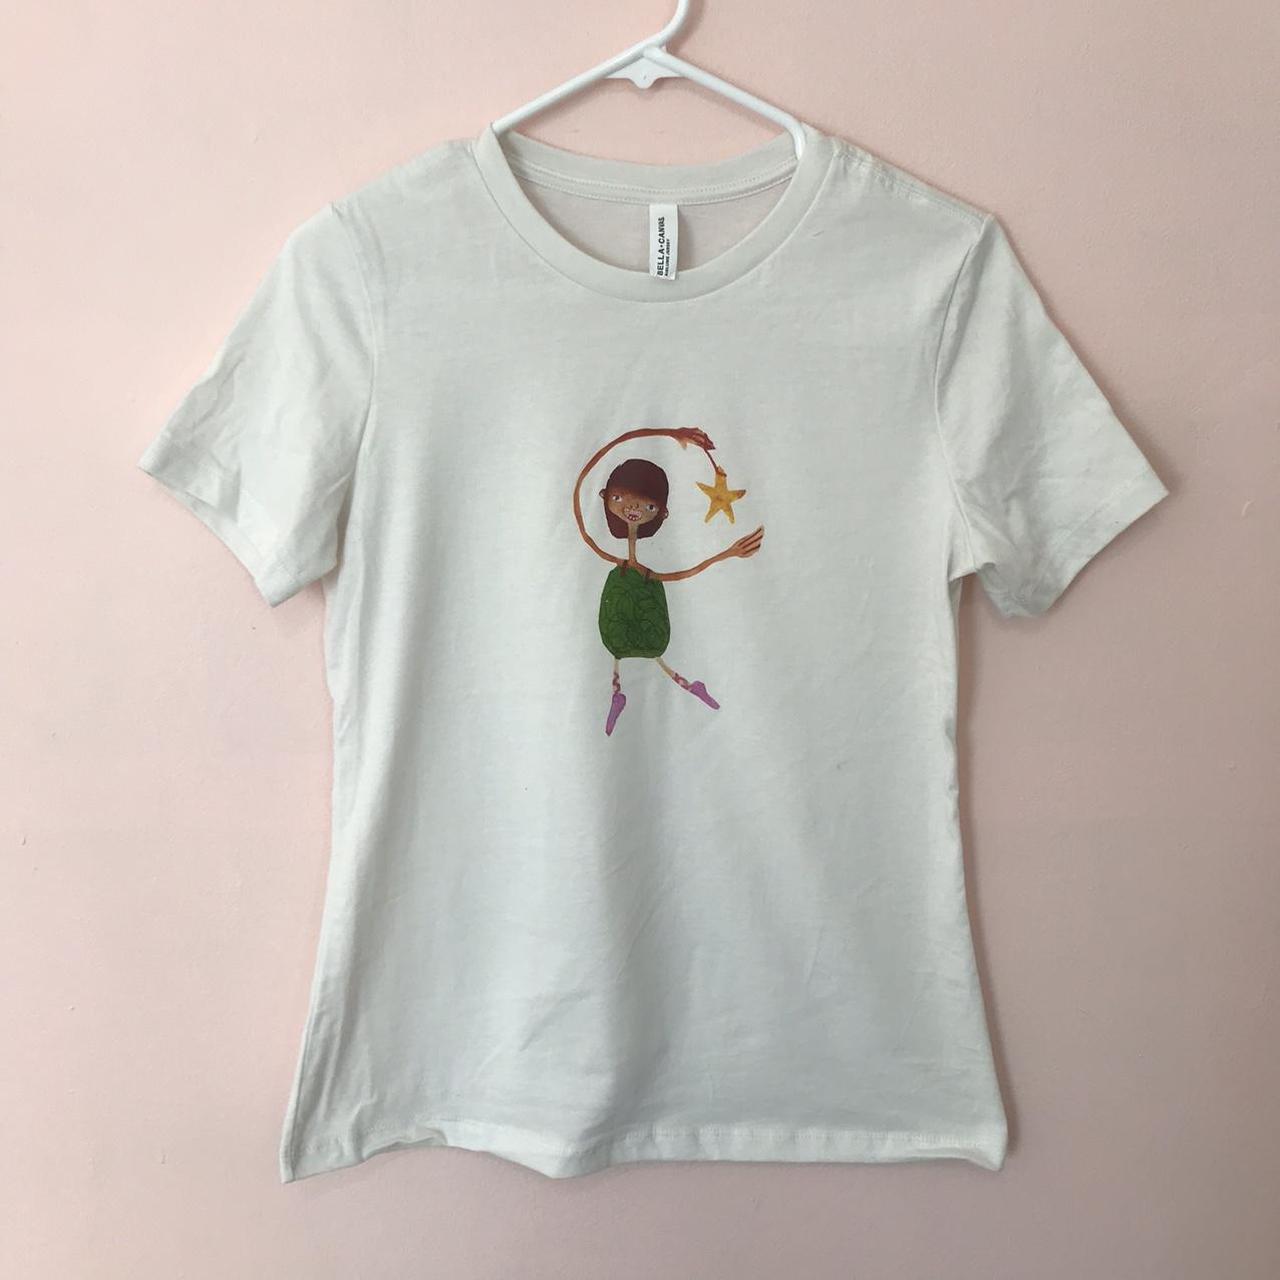 UNIF Women's White and Green T-shirt